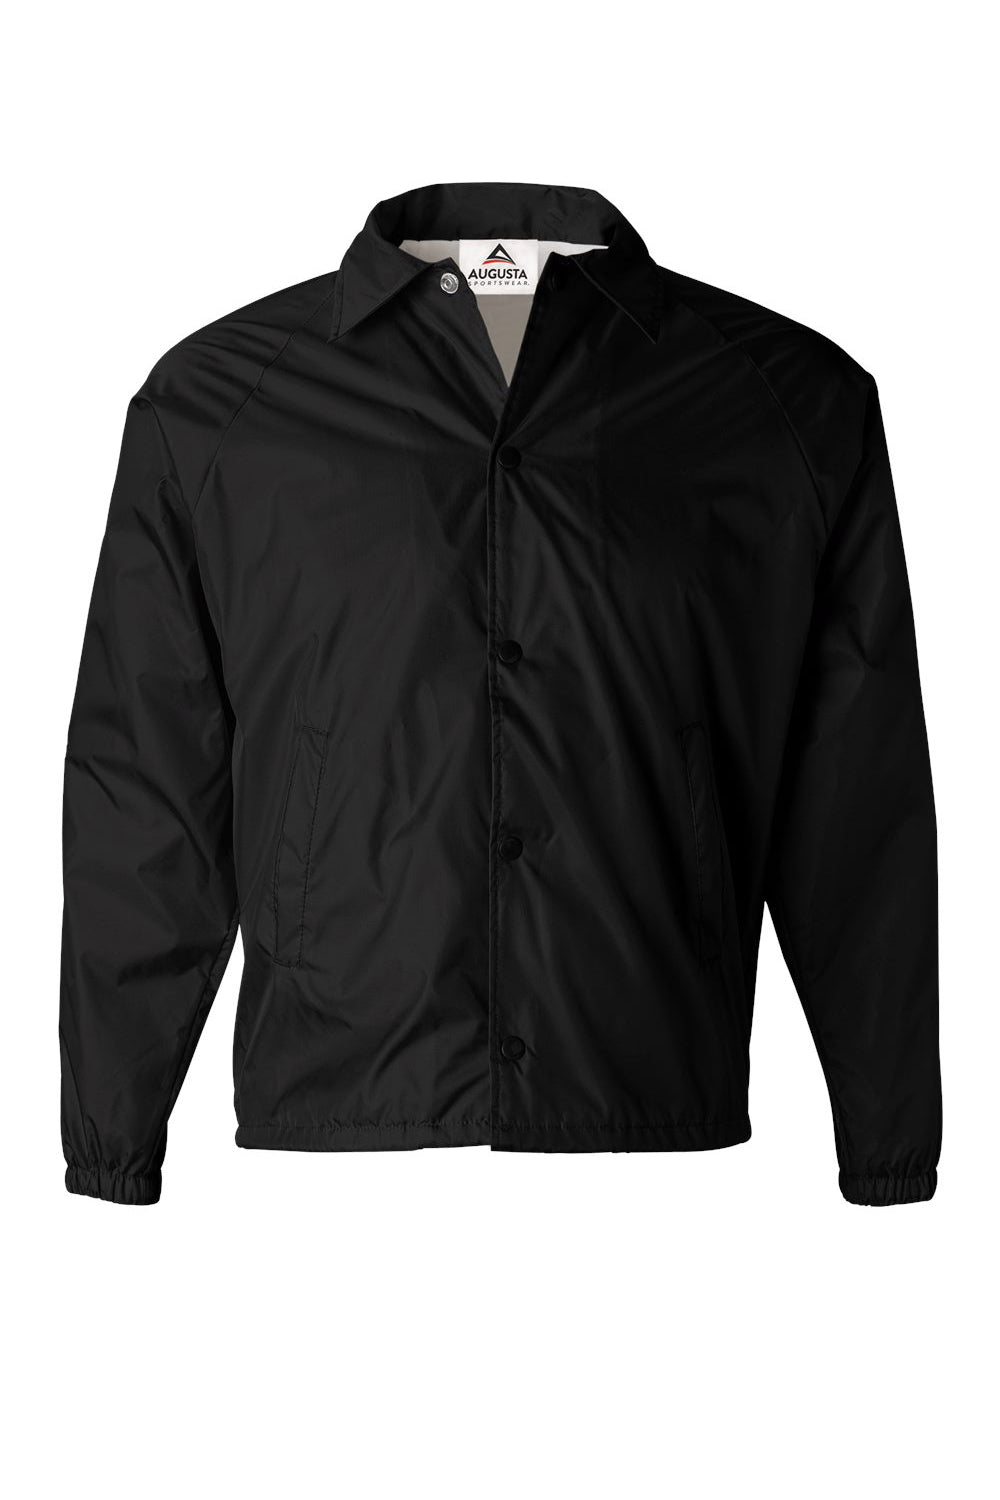 Augusta Sportswear 3100 Mens Water Resistant Snap Down Coaches Jacket Black Flat Front